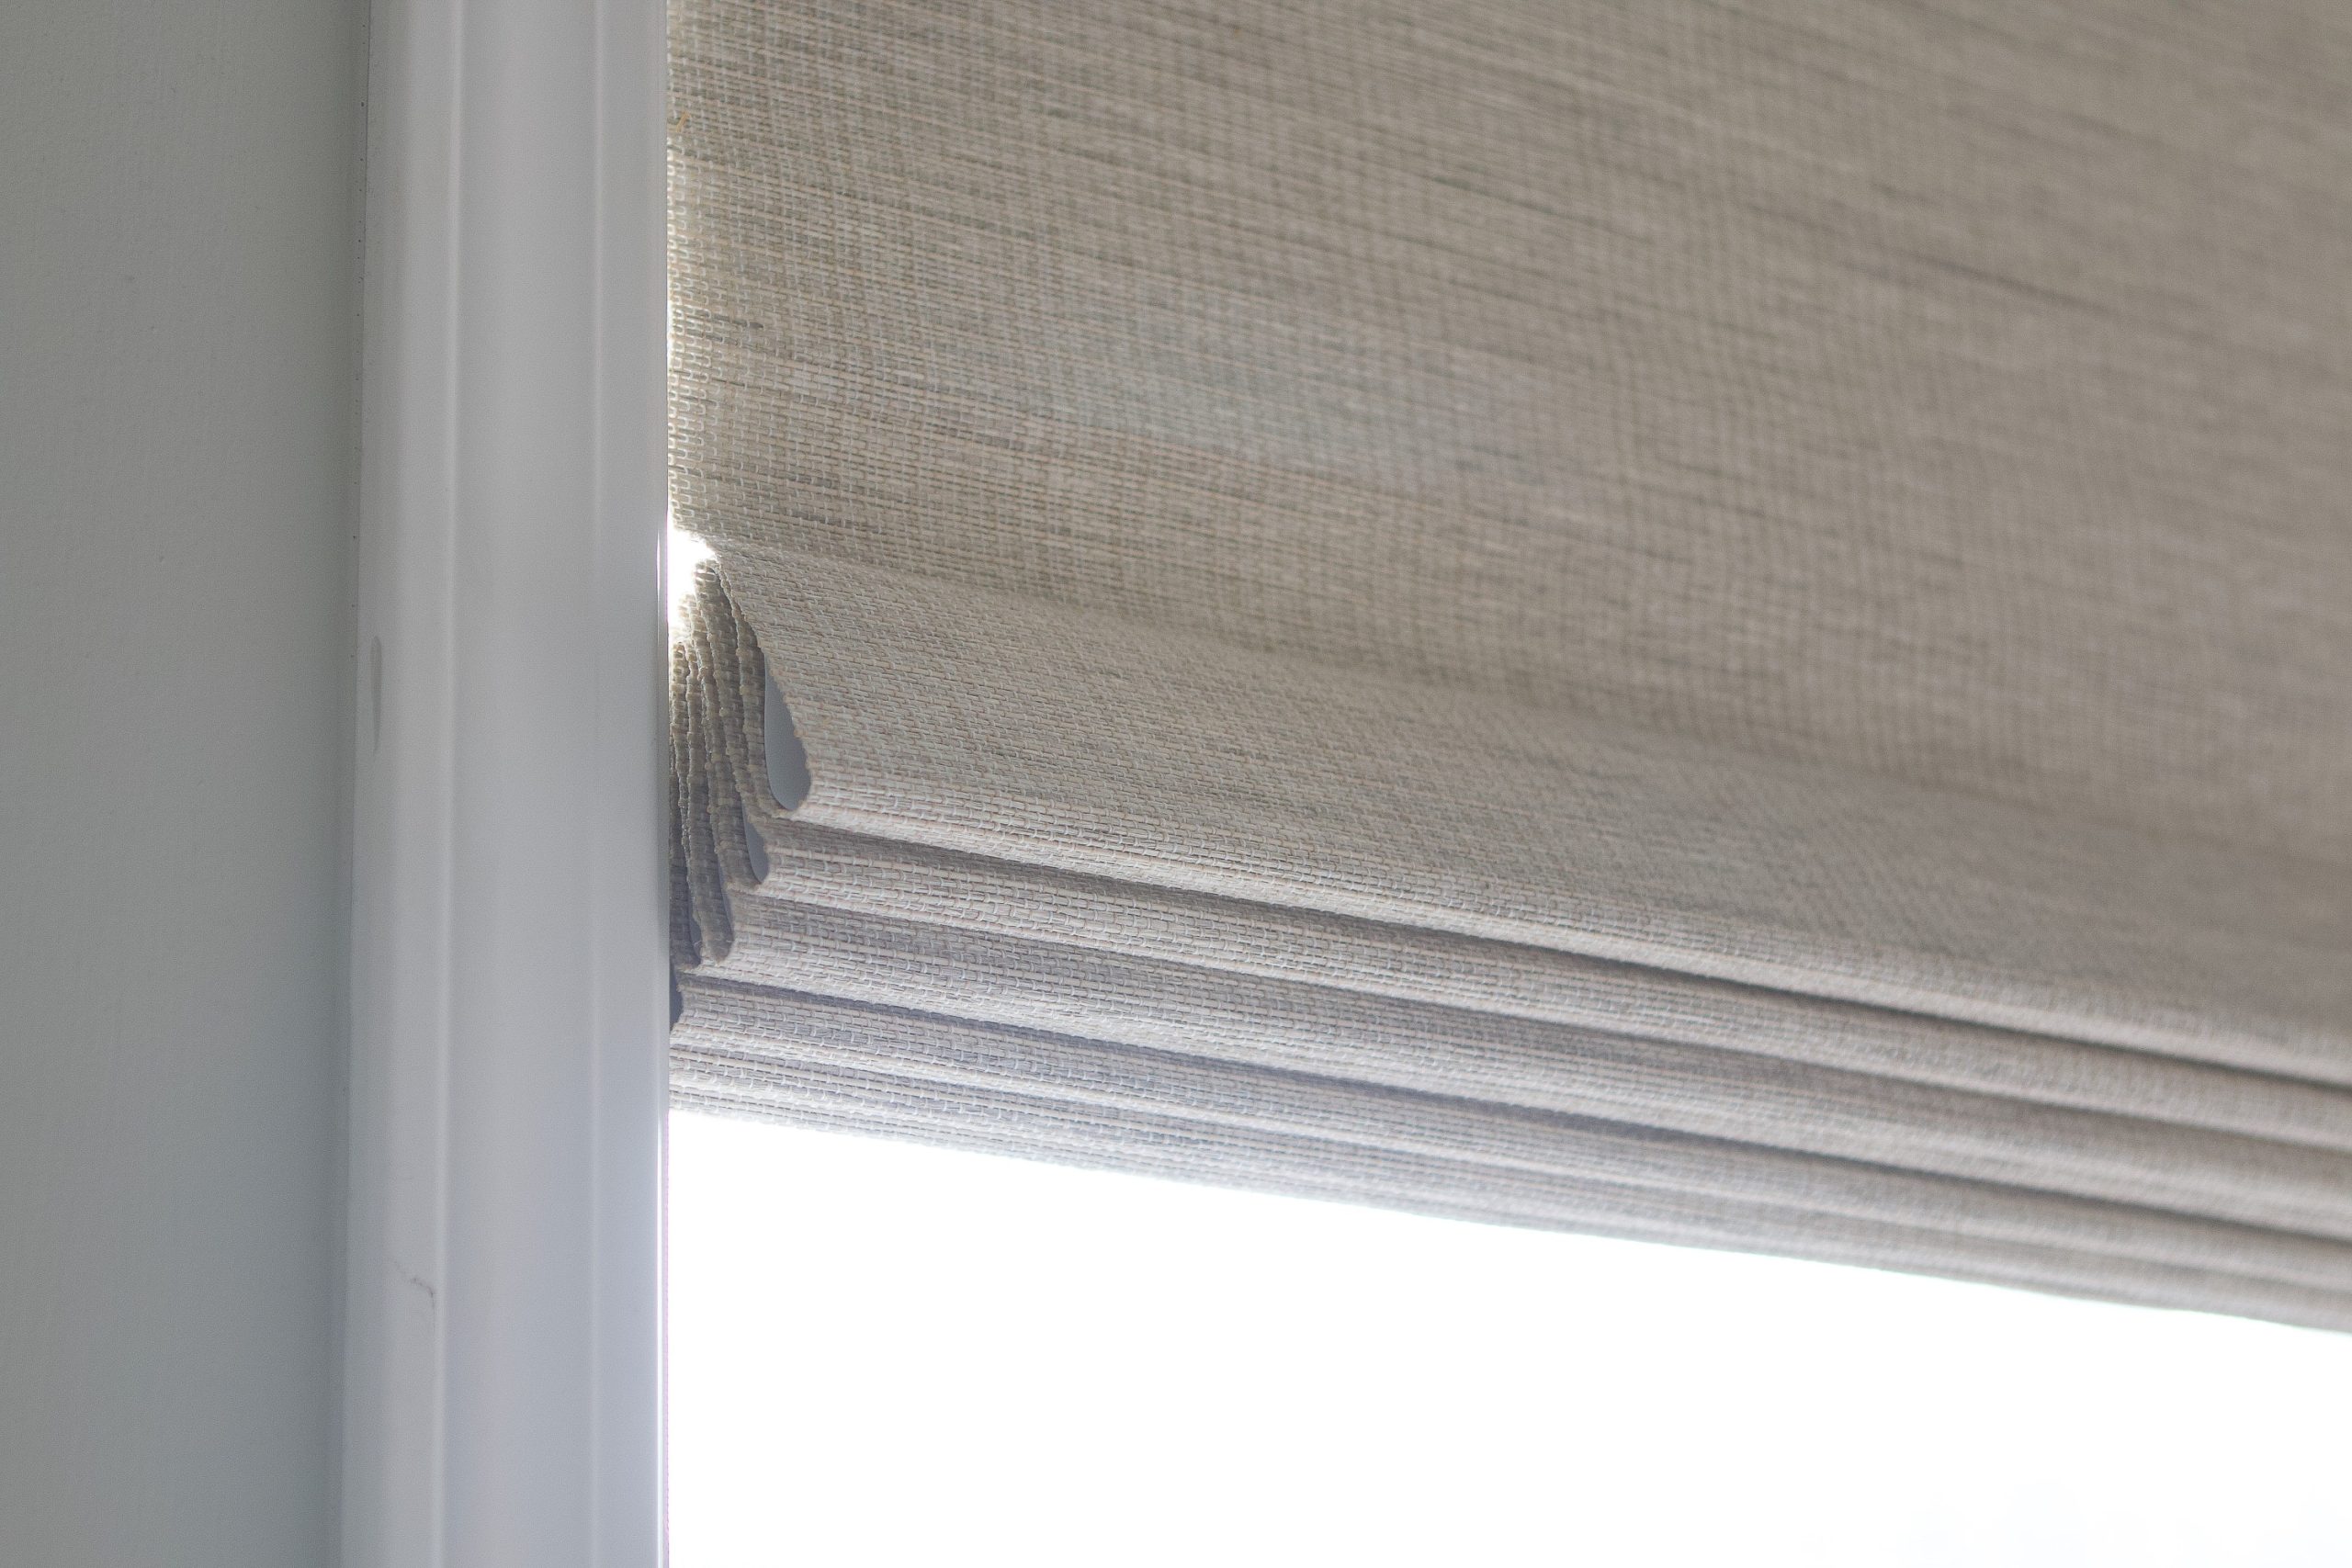 Choosing new window treatments with tips to install woven shades